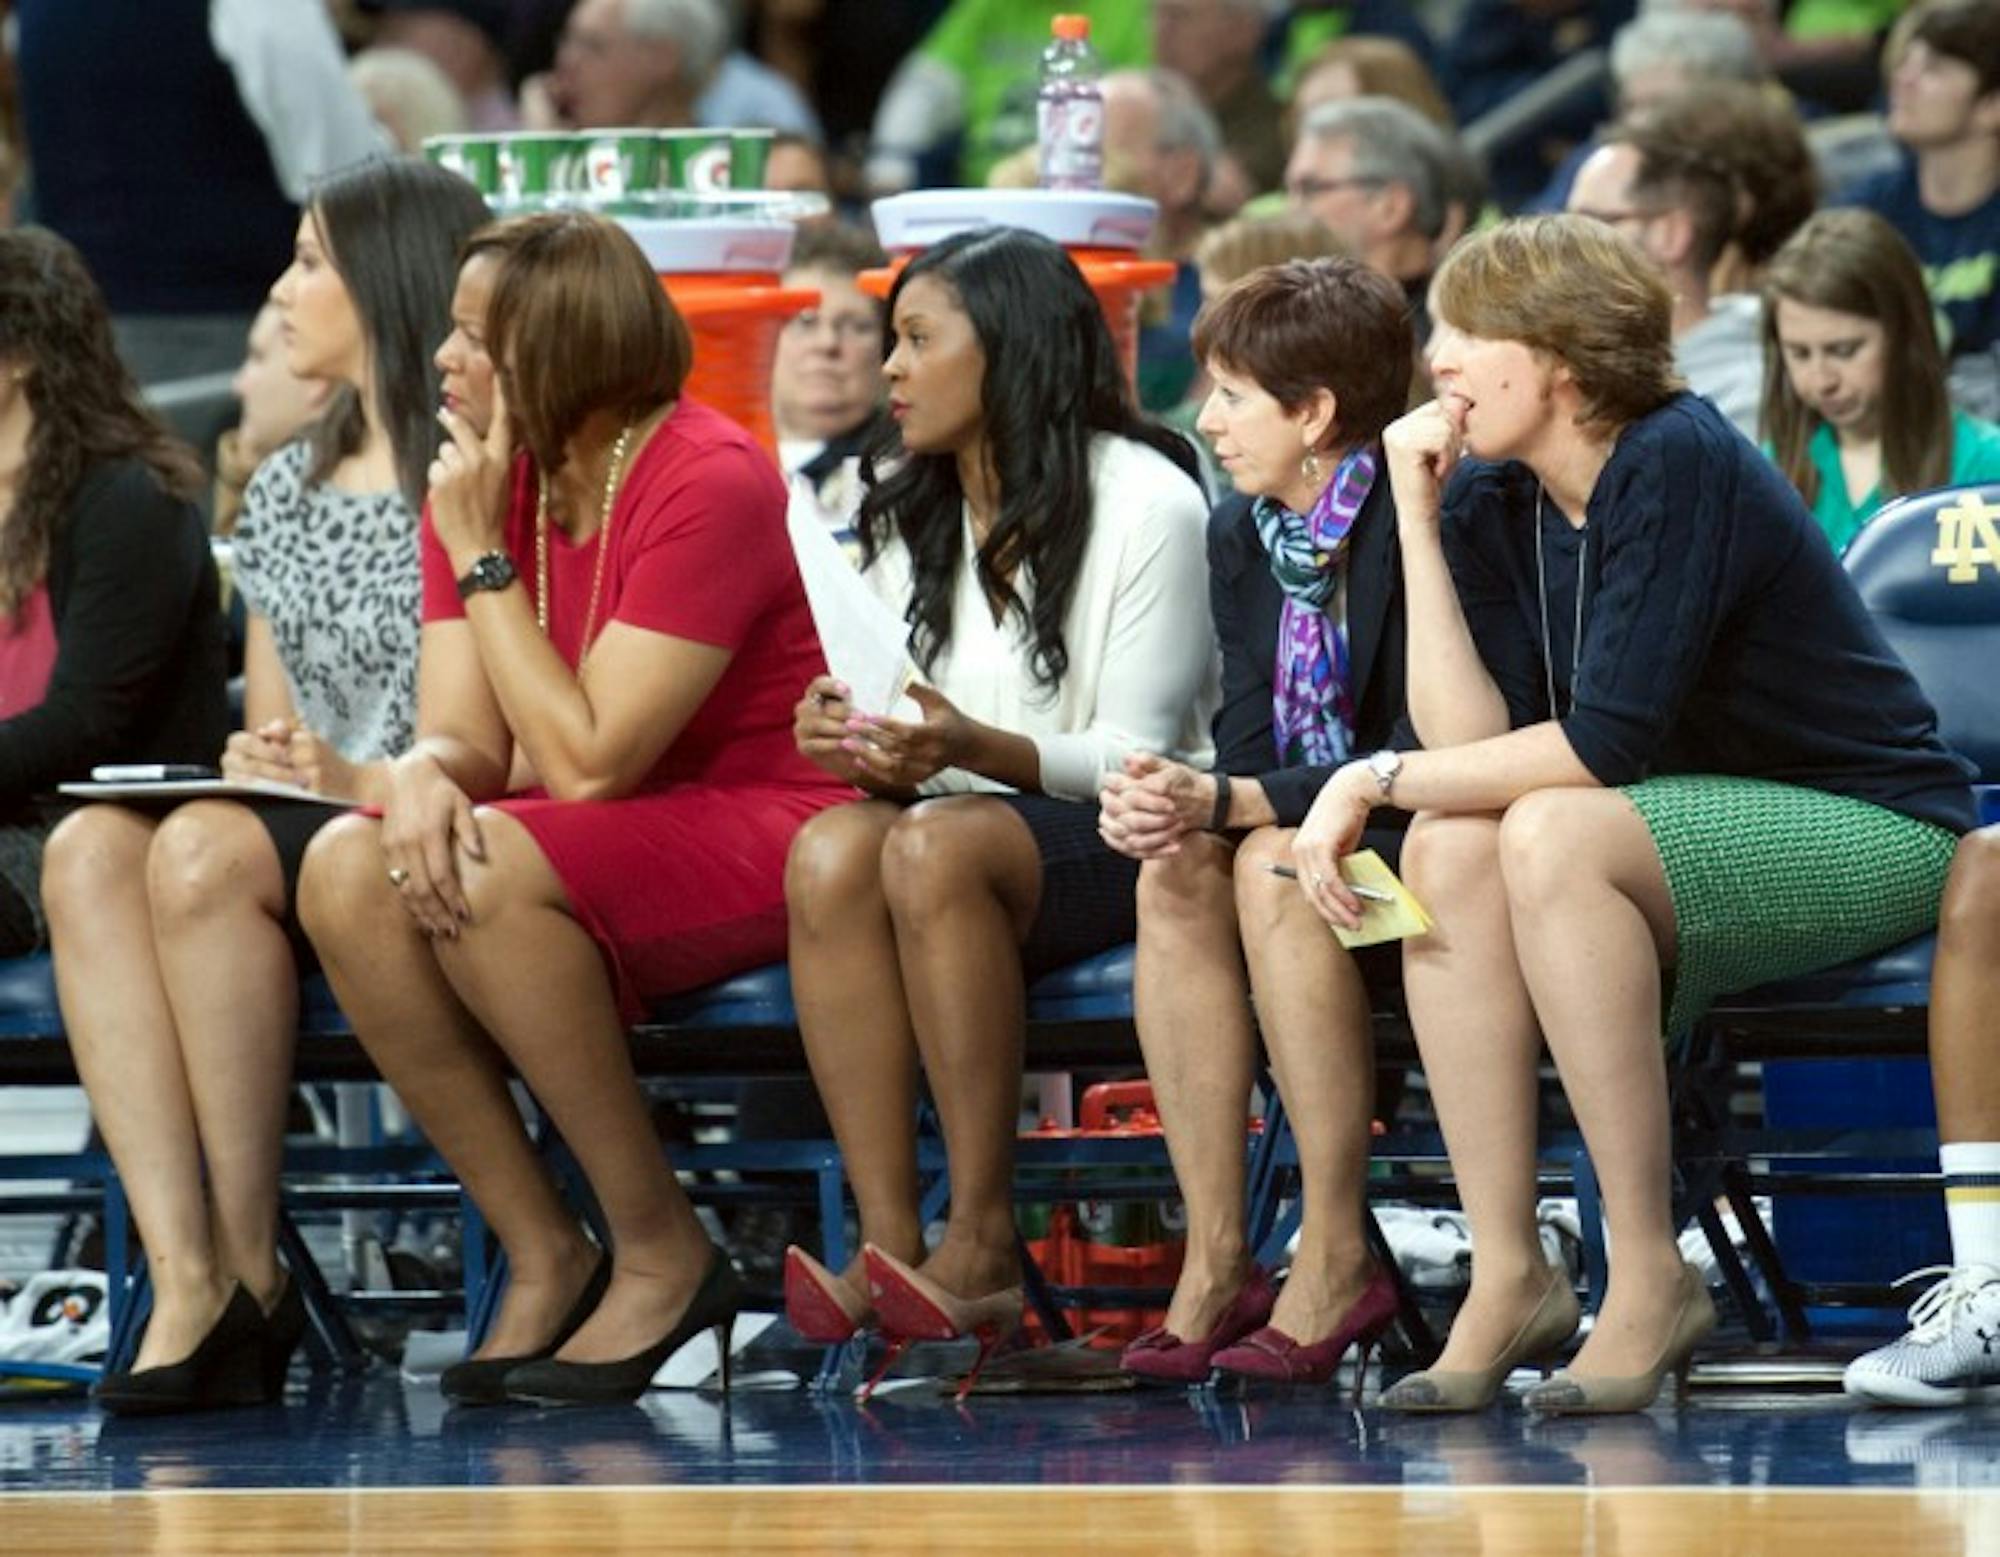 Irish assistant coach Niele Ivey, center, sits courtside during Notre Dame's 89-76 win over Georgia Tech on Jan. 22 at Purcell Pavilion.